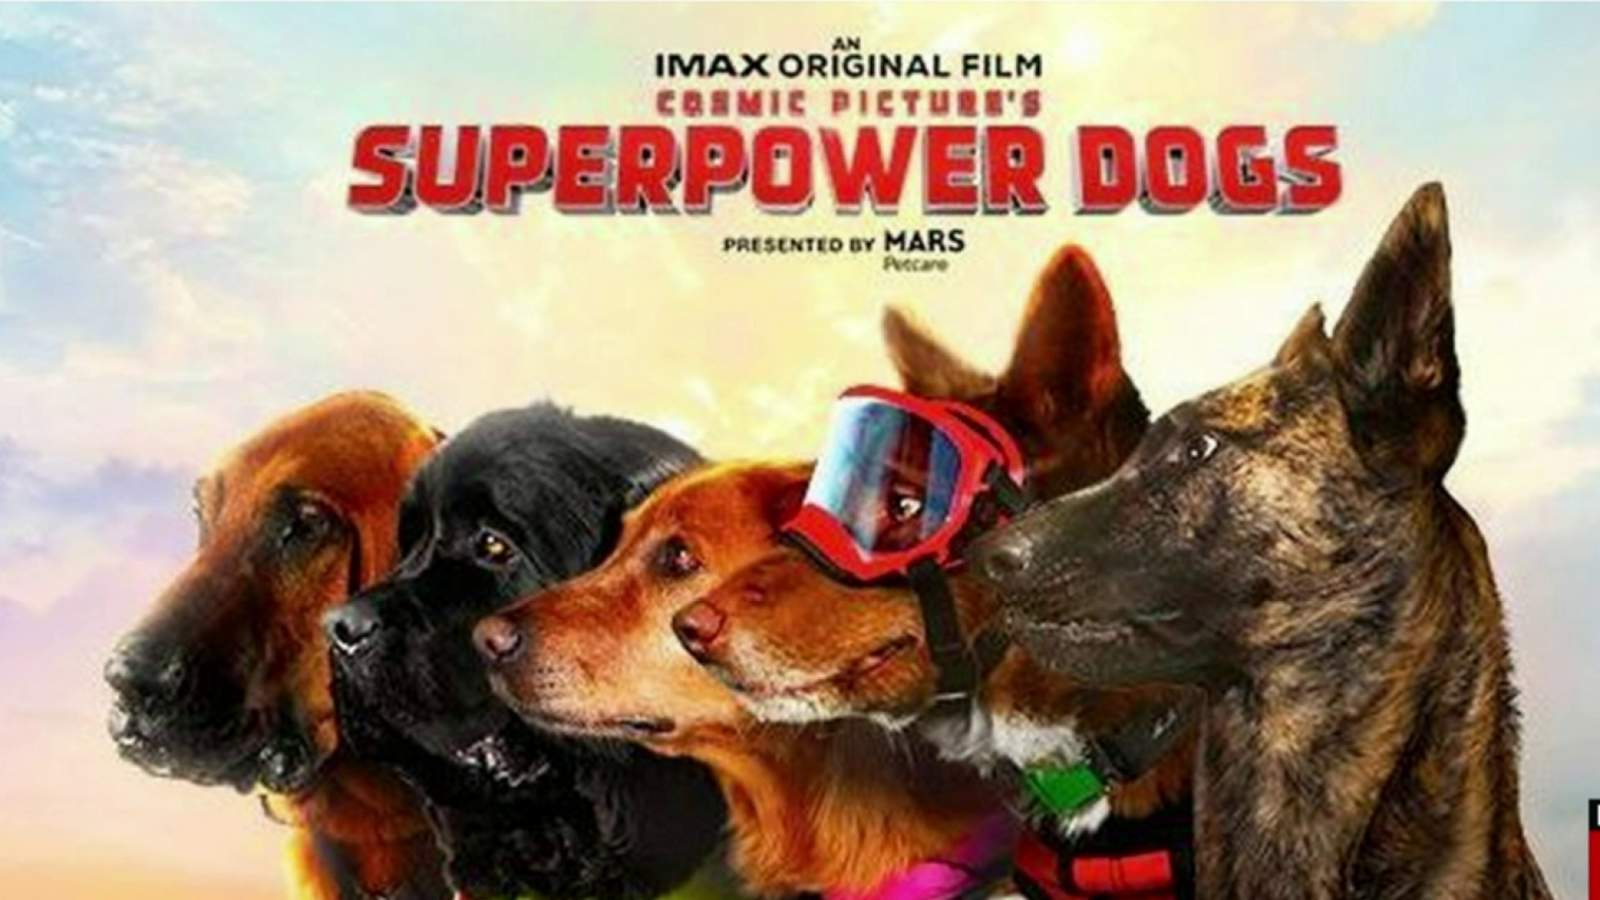 Join in on the fun at Michigan Humane’s Movie Event